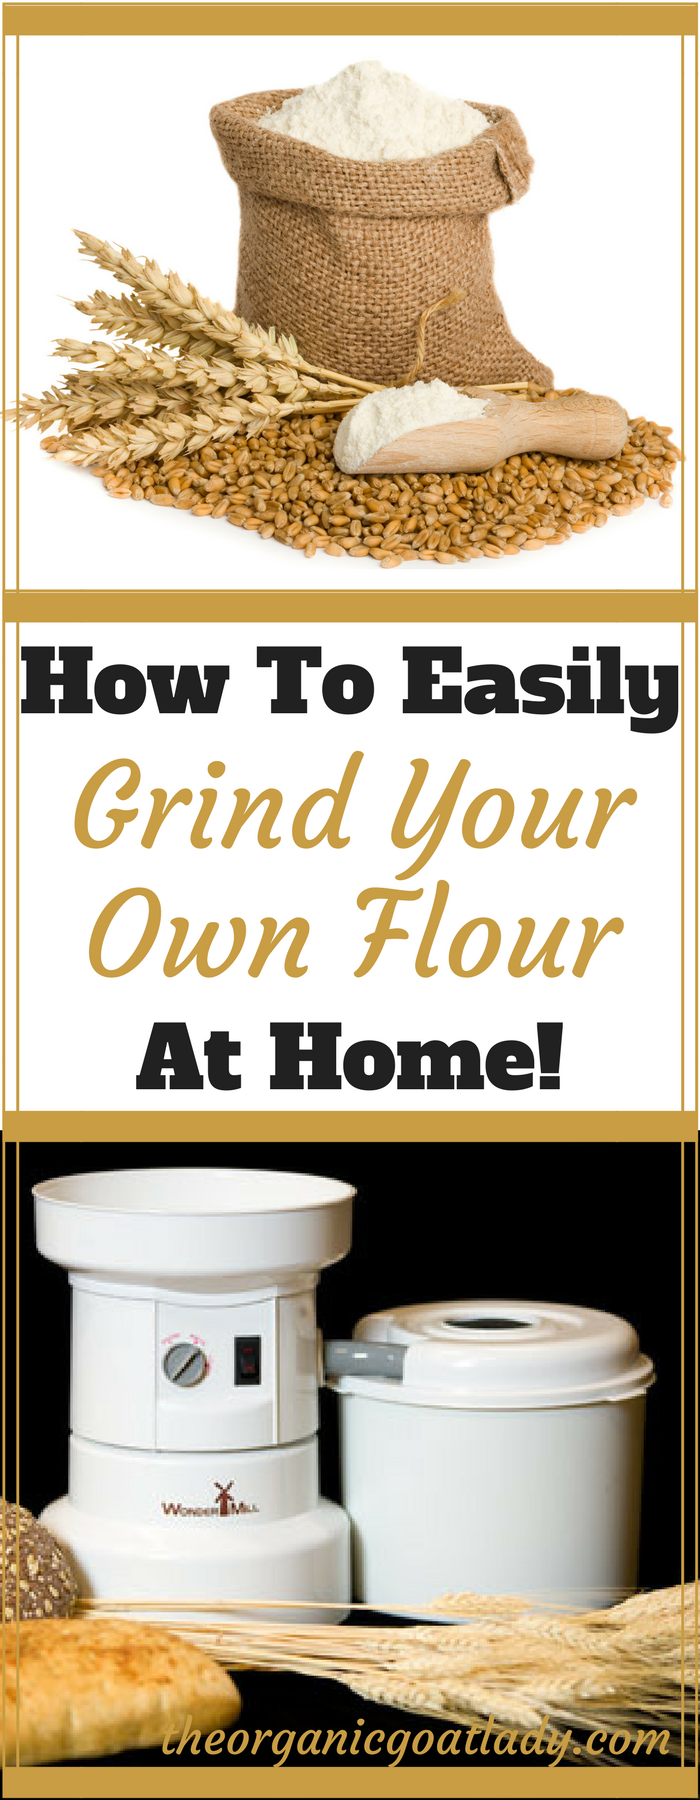 How To Easily Grind Your Own Flours At Home!